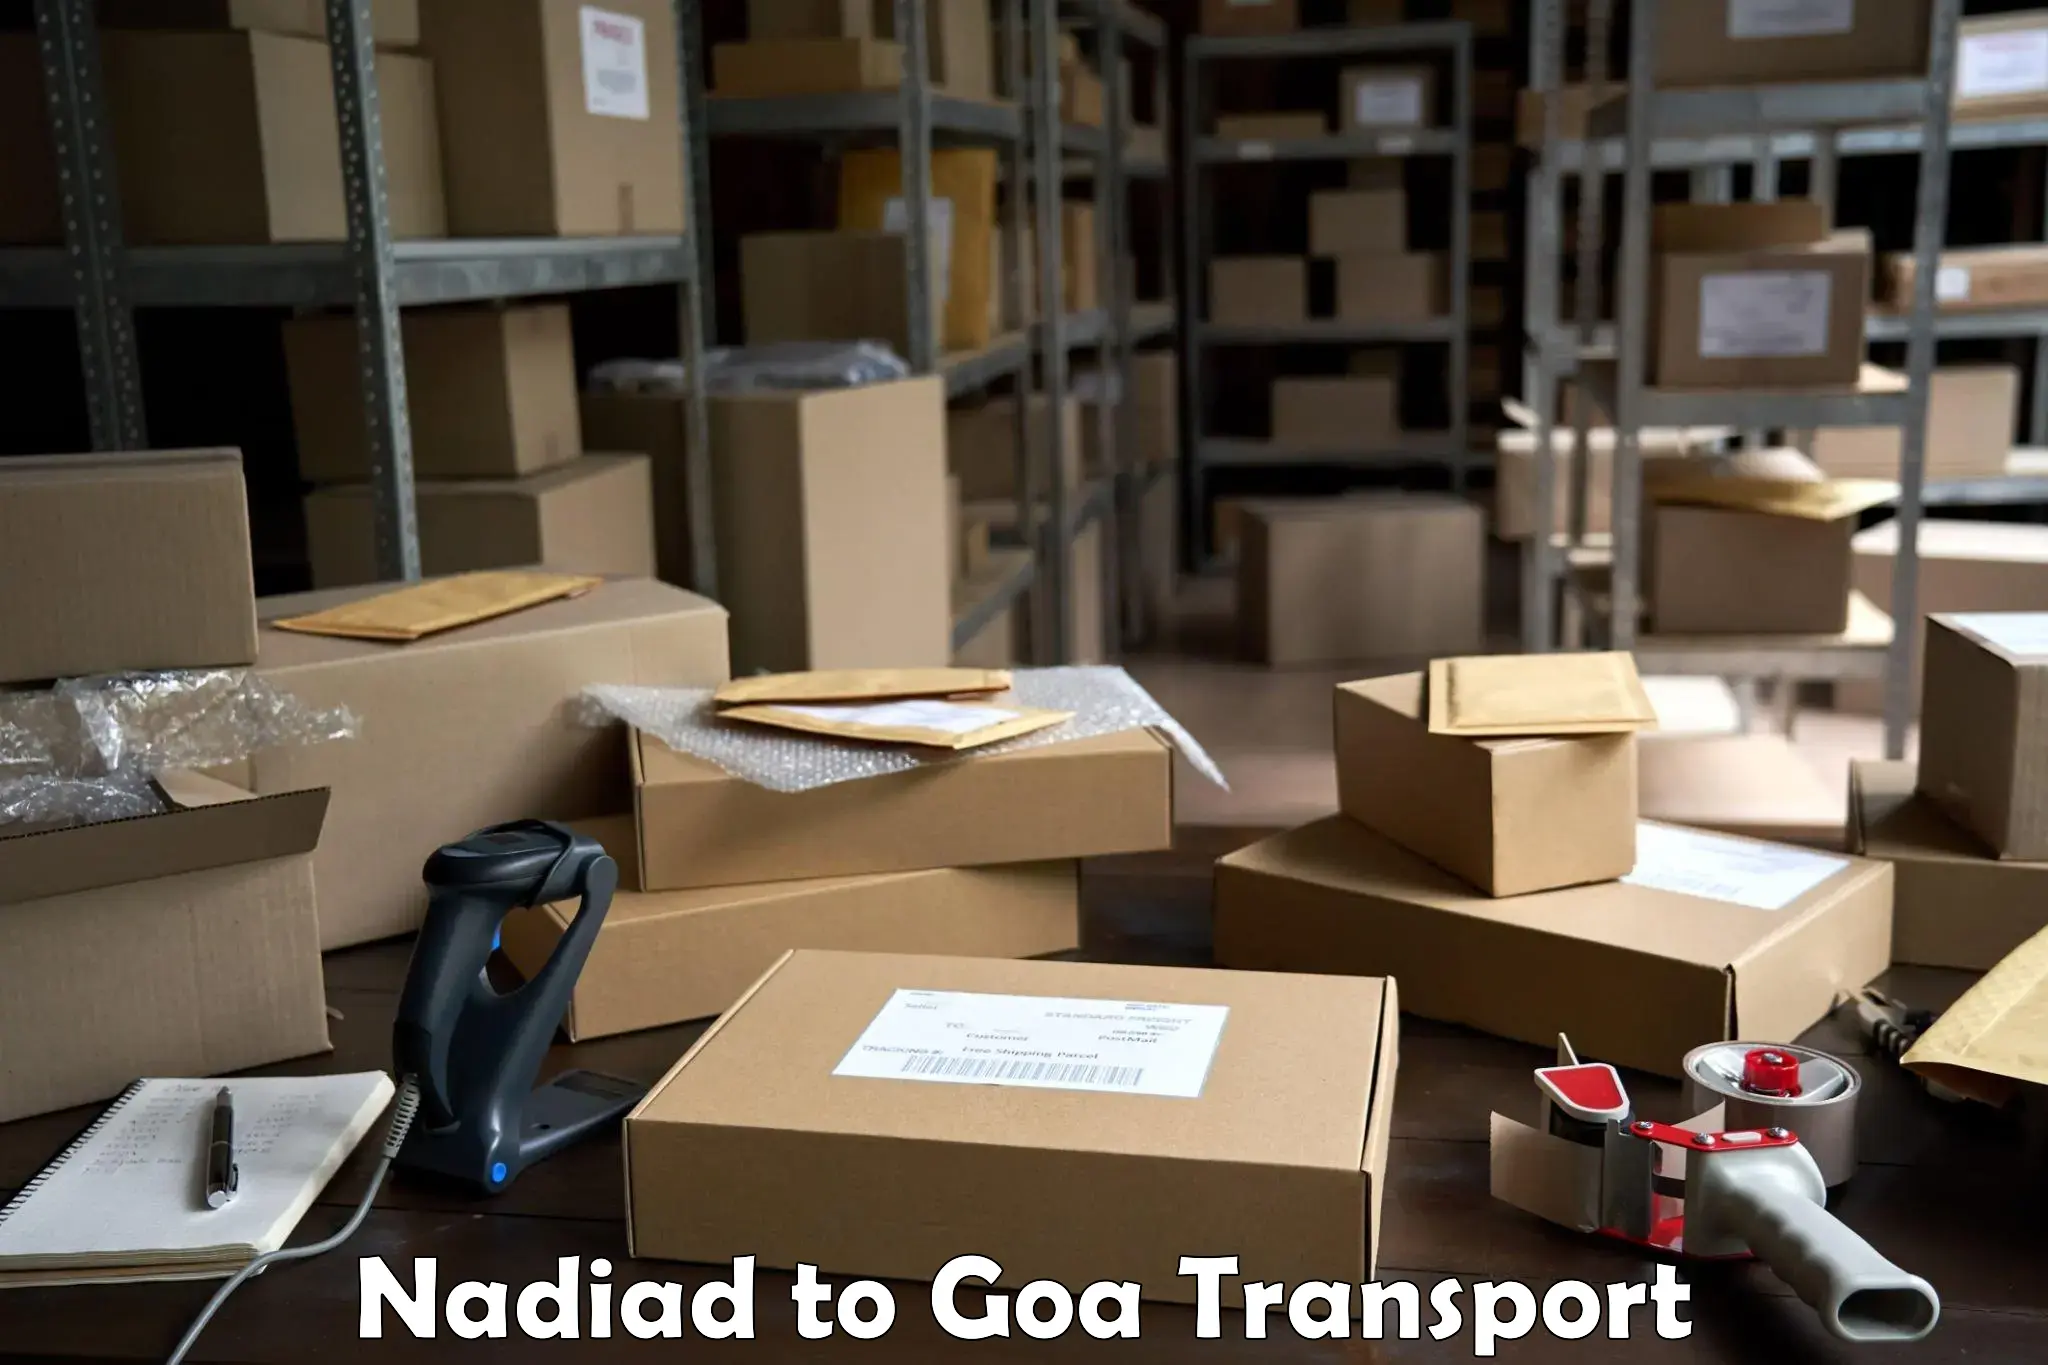 Delivery service Nadiad to IIT Goa